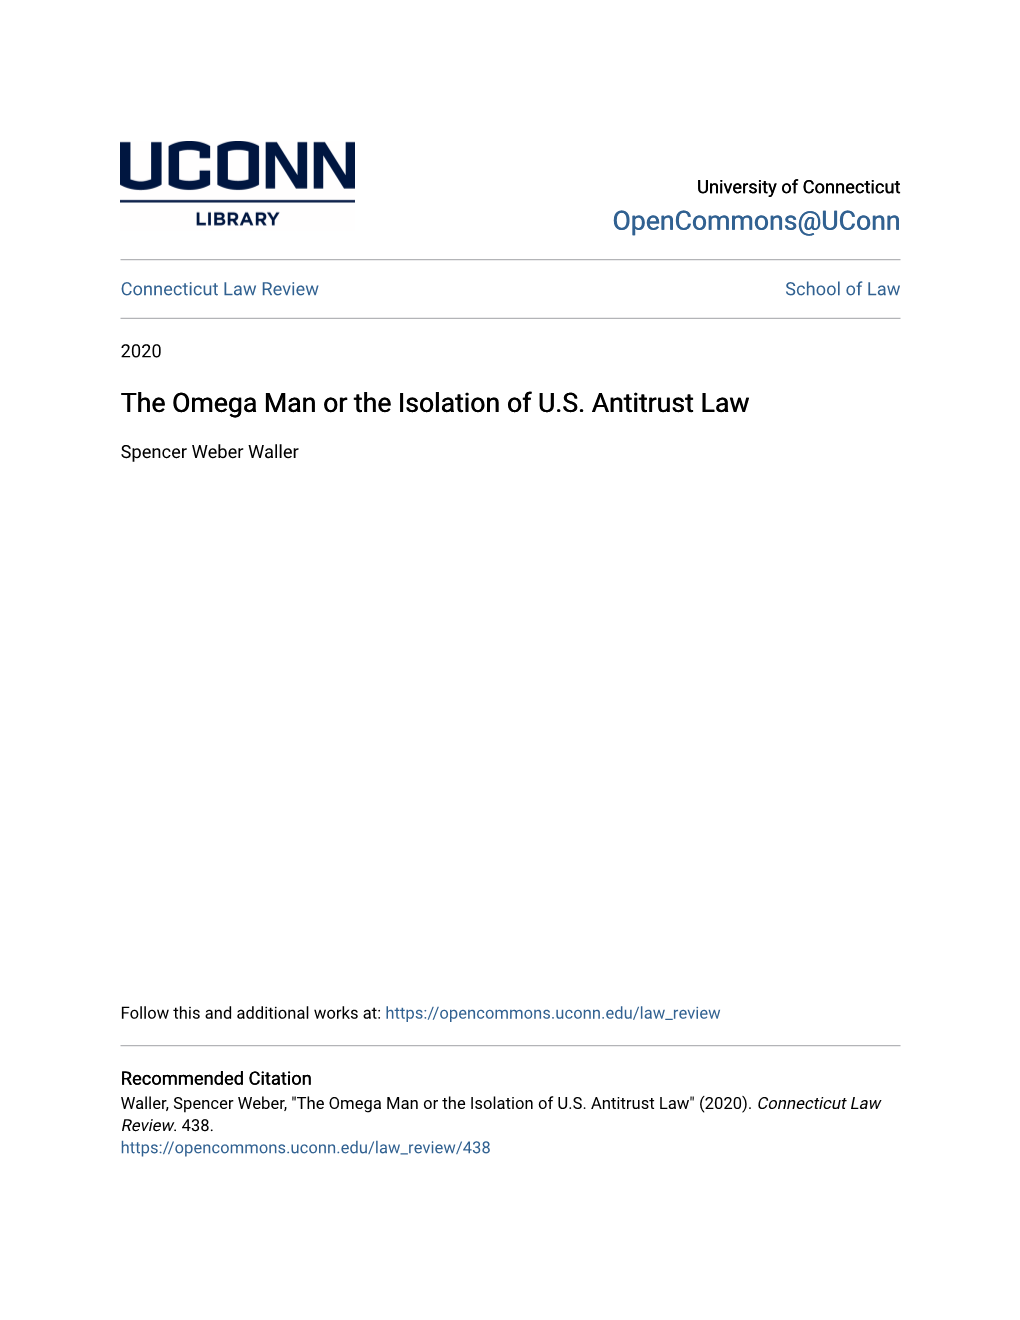 The Omega Man Or the Isolation of U.S. Antitrust Law